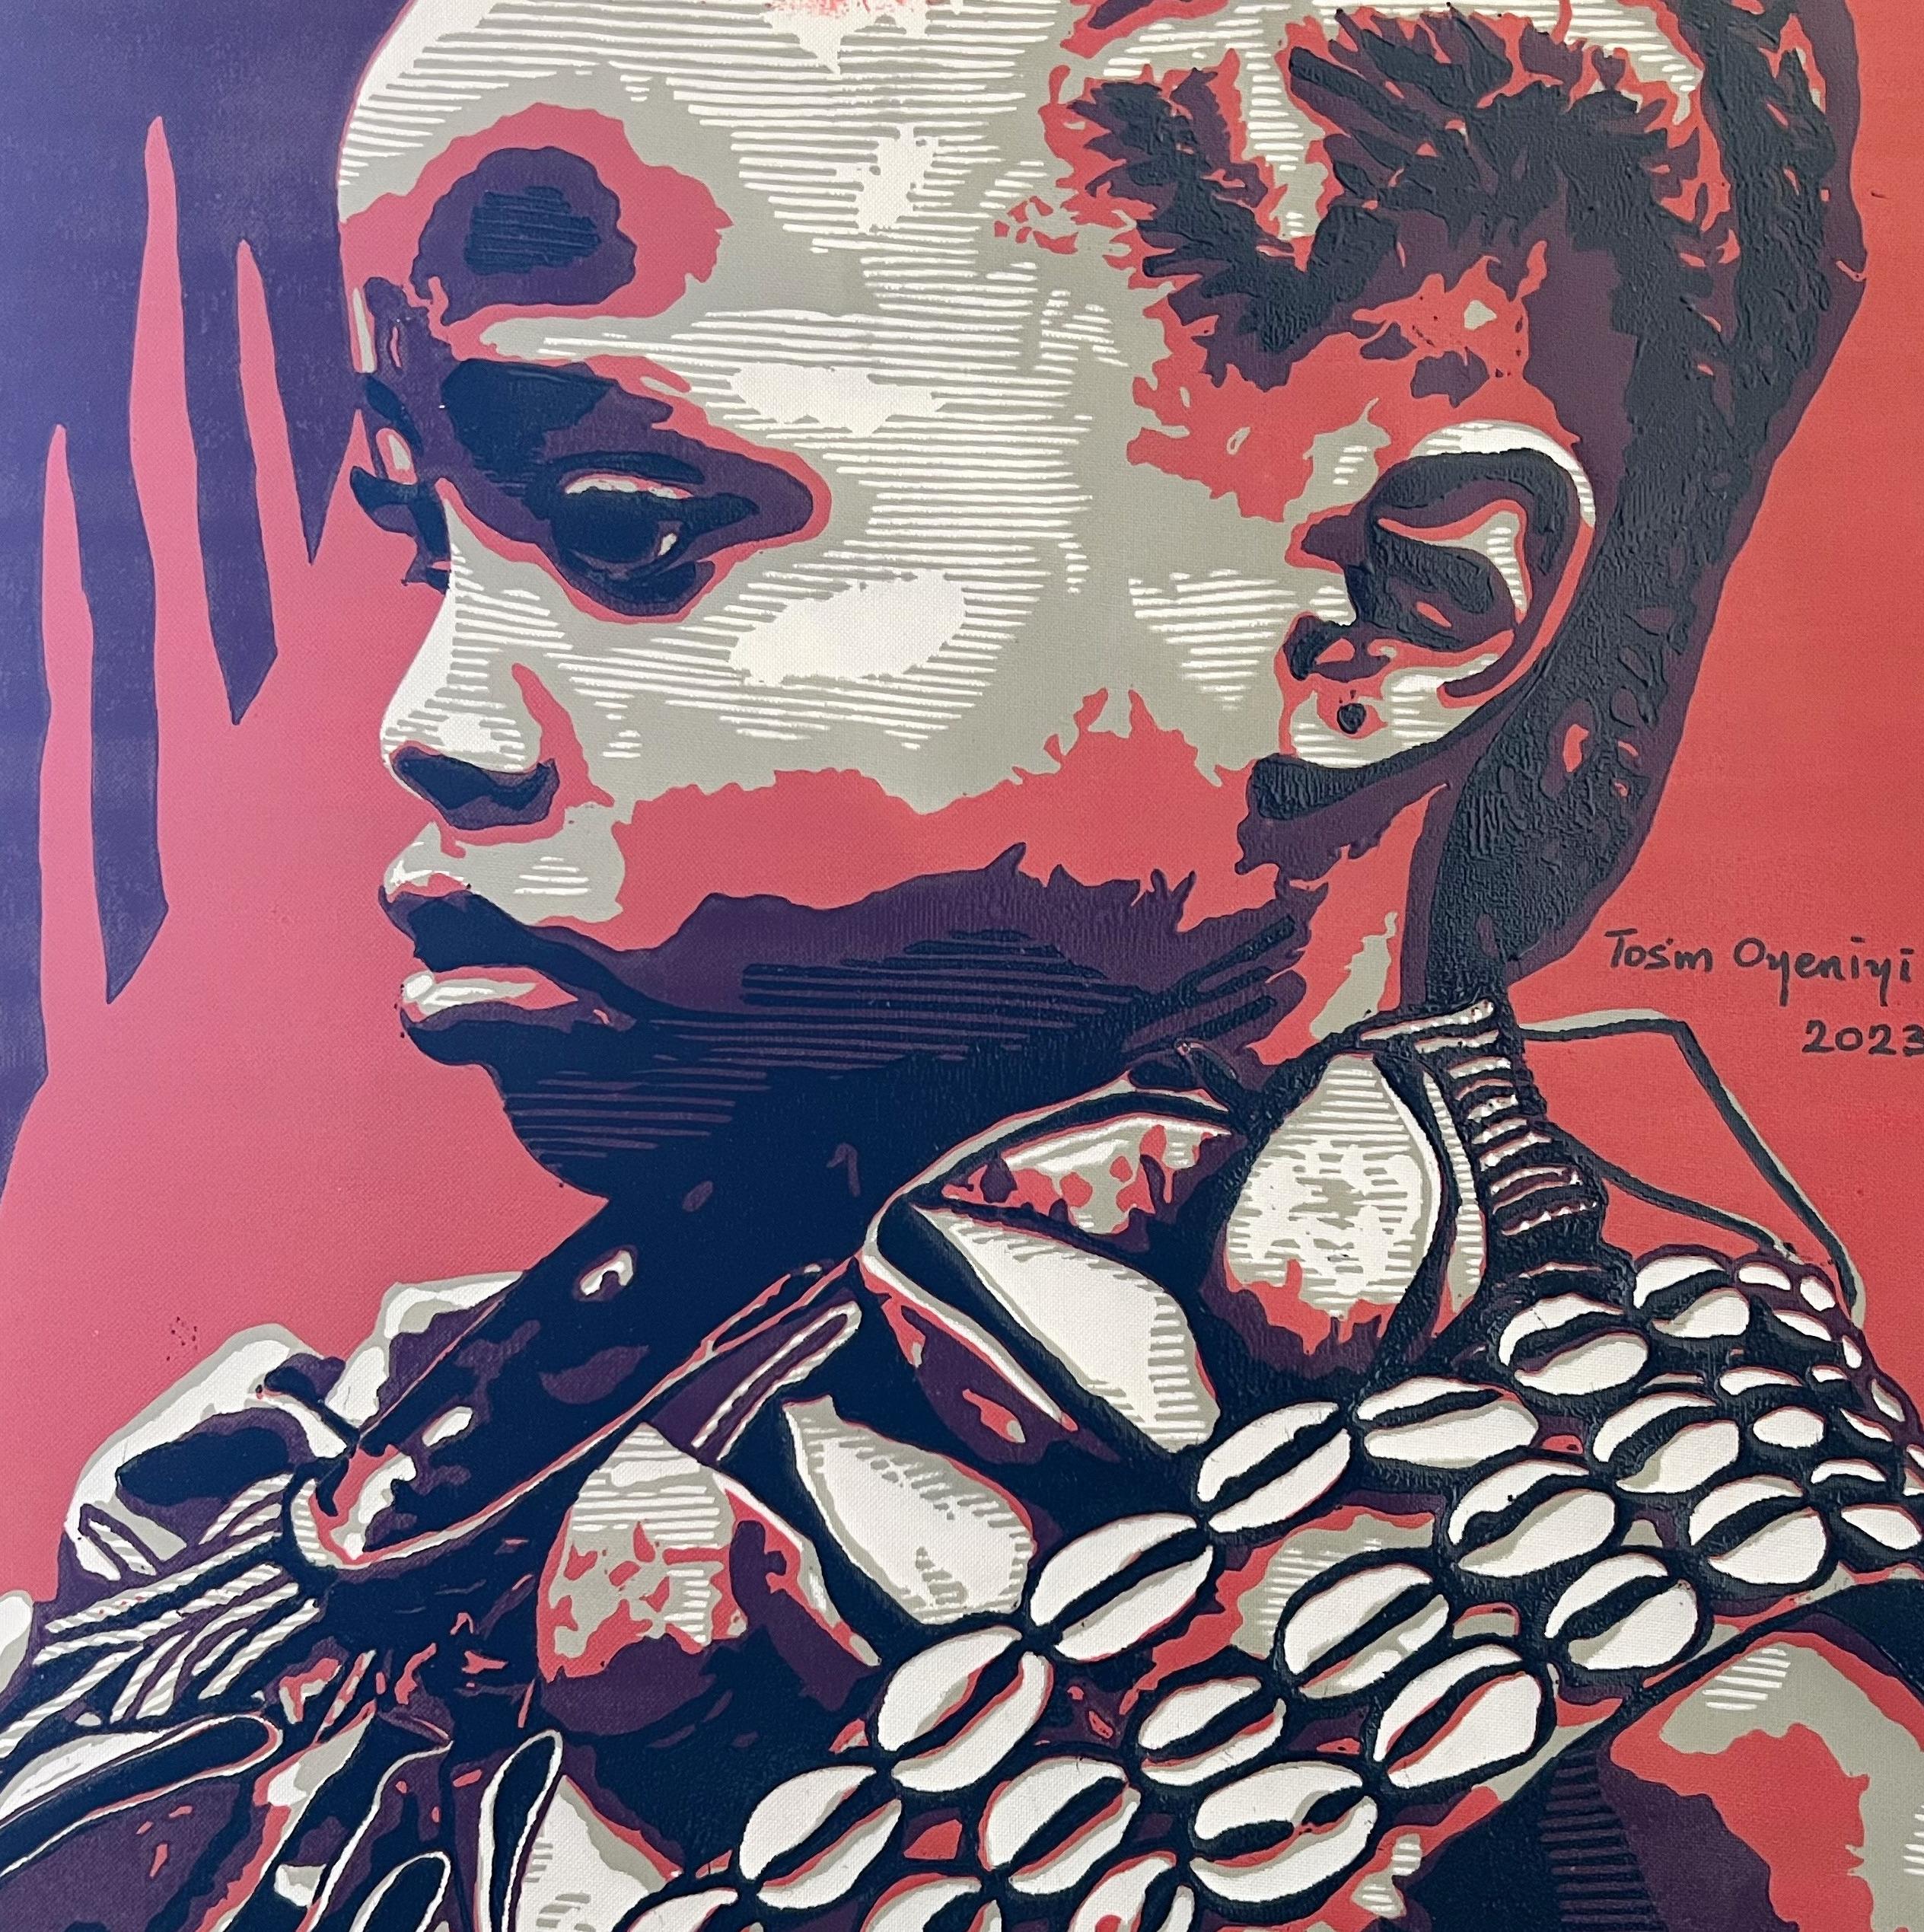 Shipping Procedure
Offest Ink on Linen
Unmounted artwork
Ships in a well-protected tube from Nigeria
Accompanied by a Certificate of Authenticity.

About Artist
Tosin Oyeniyi is an intrinsically talented Print-Making Artist who hails from Ogbomosho,